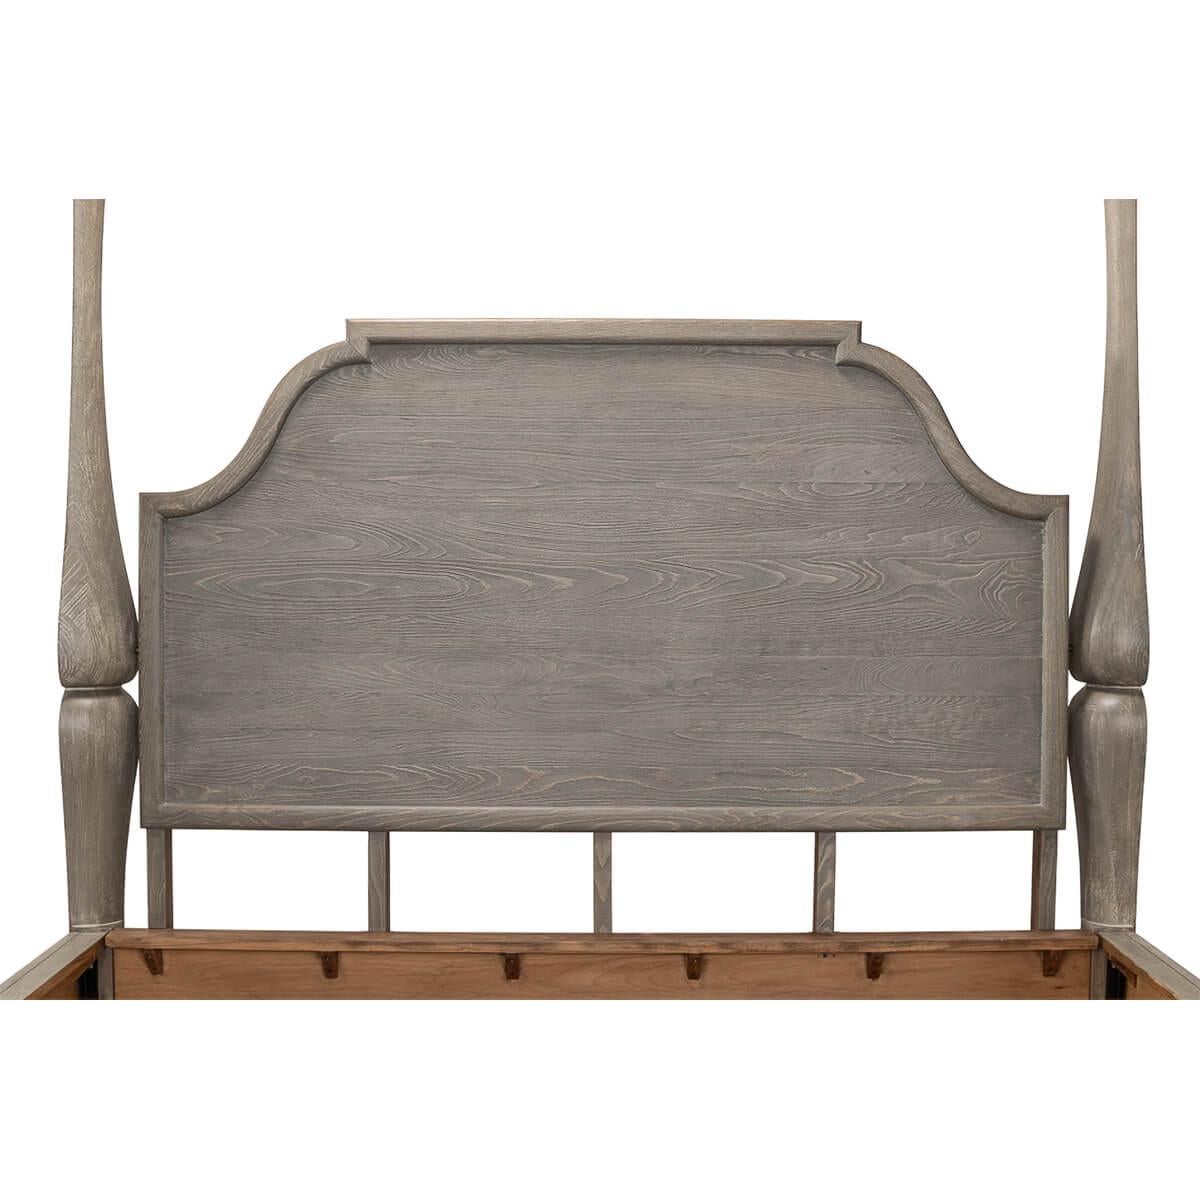 Asian European Style Canopy Bed For Sale